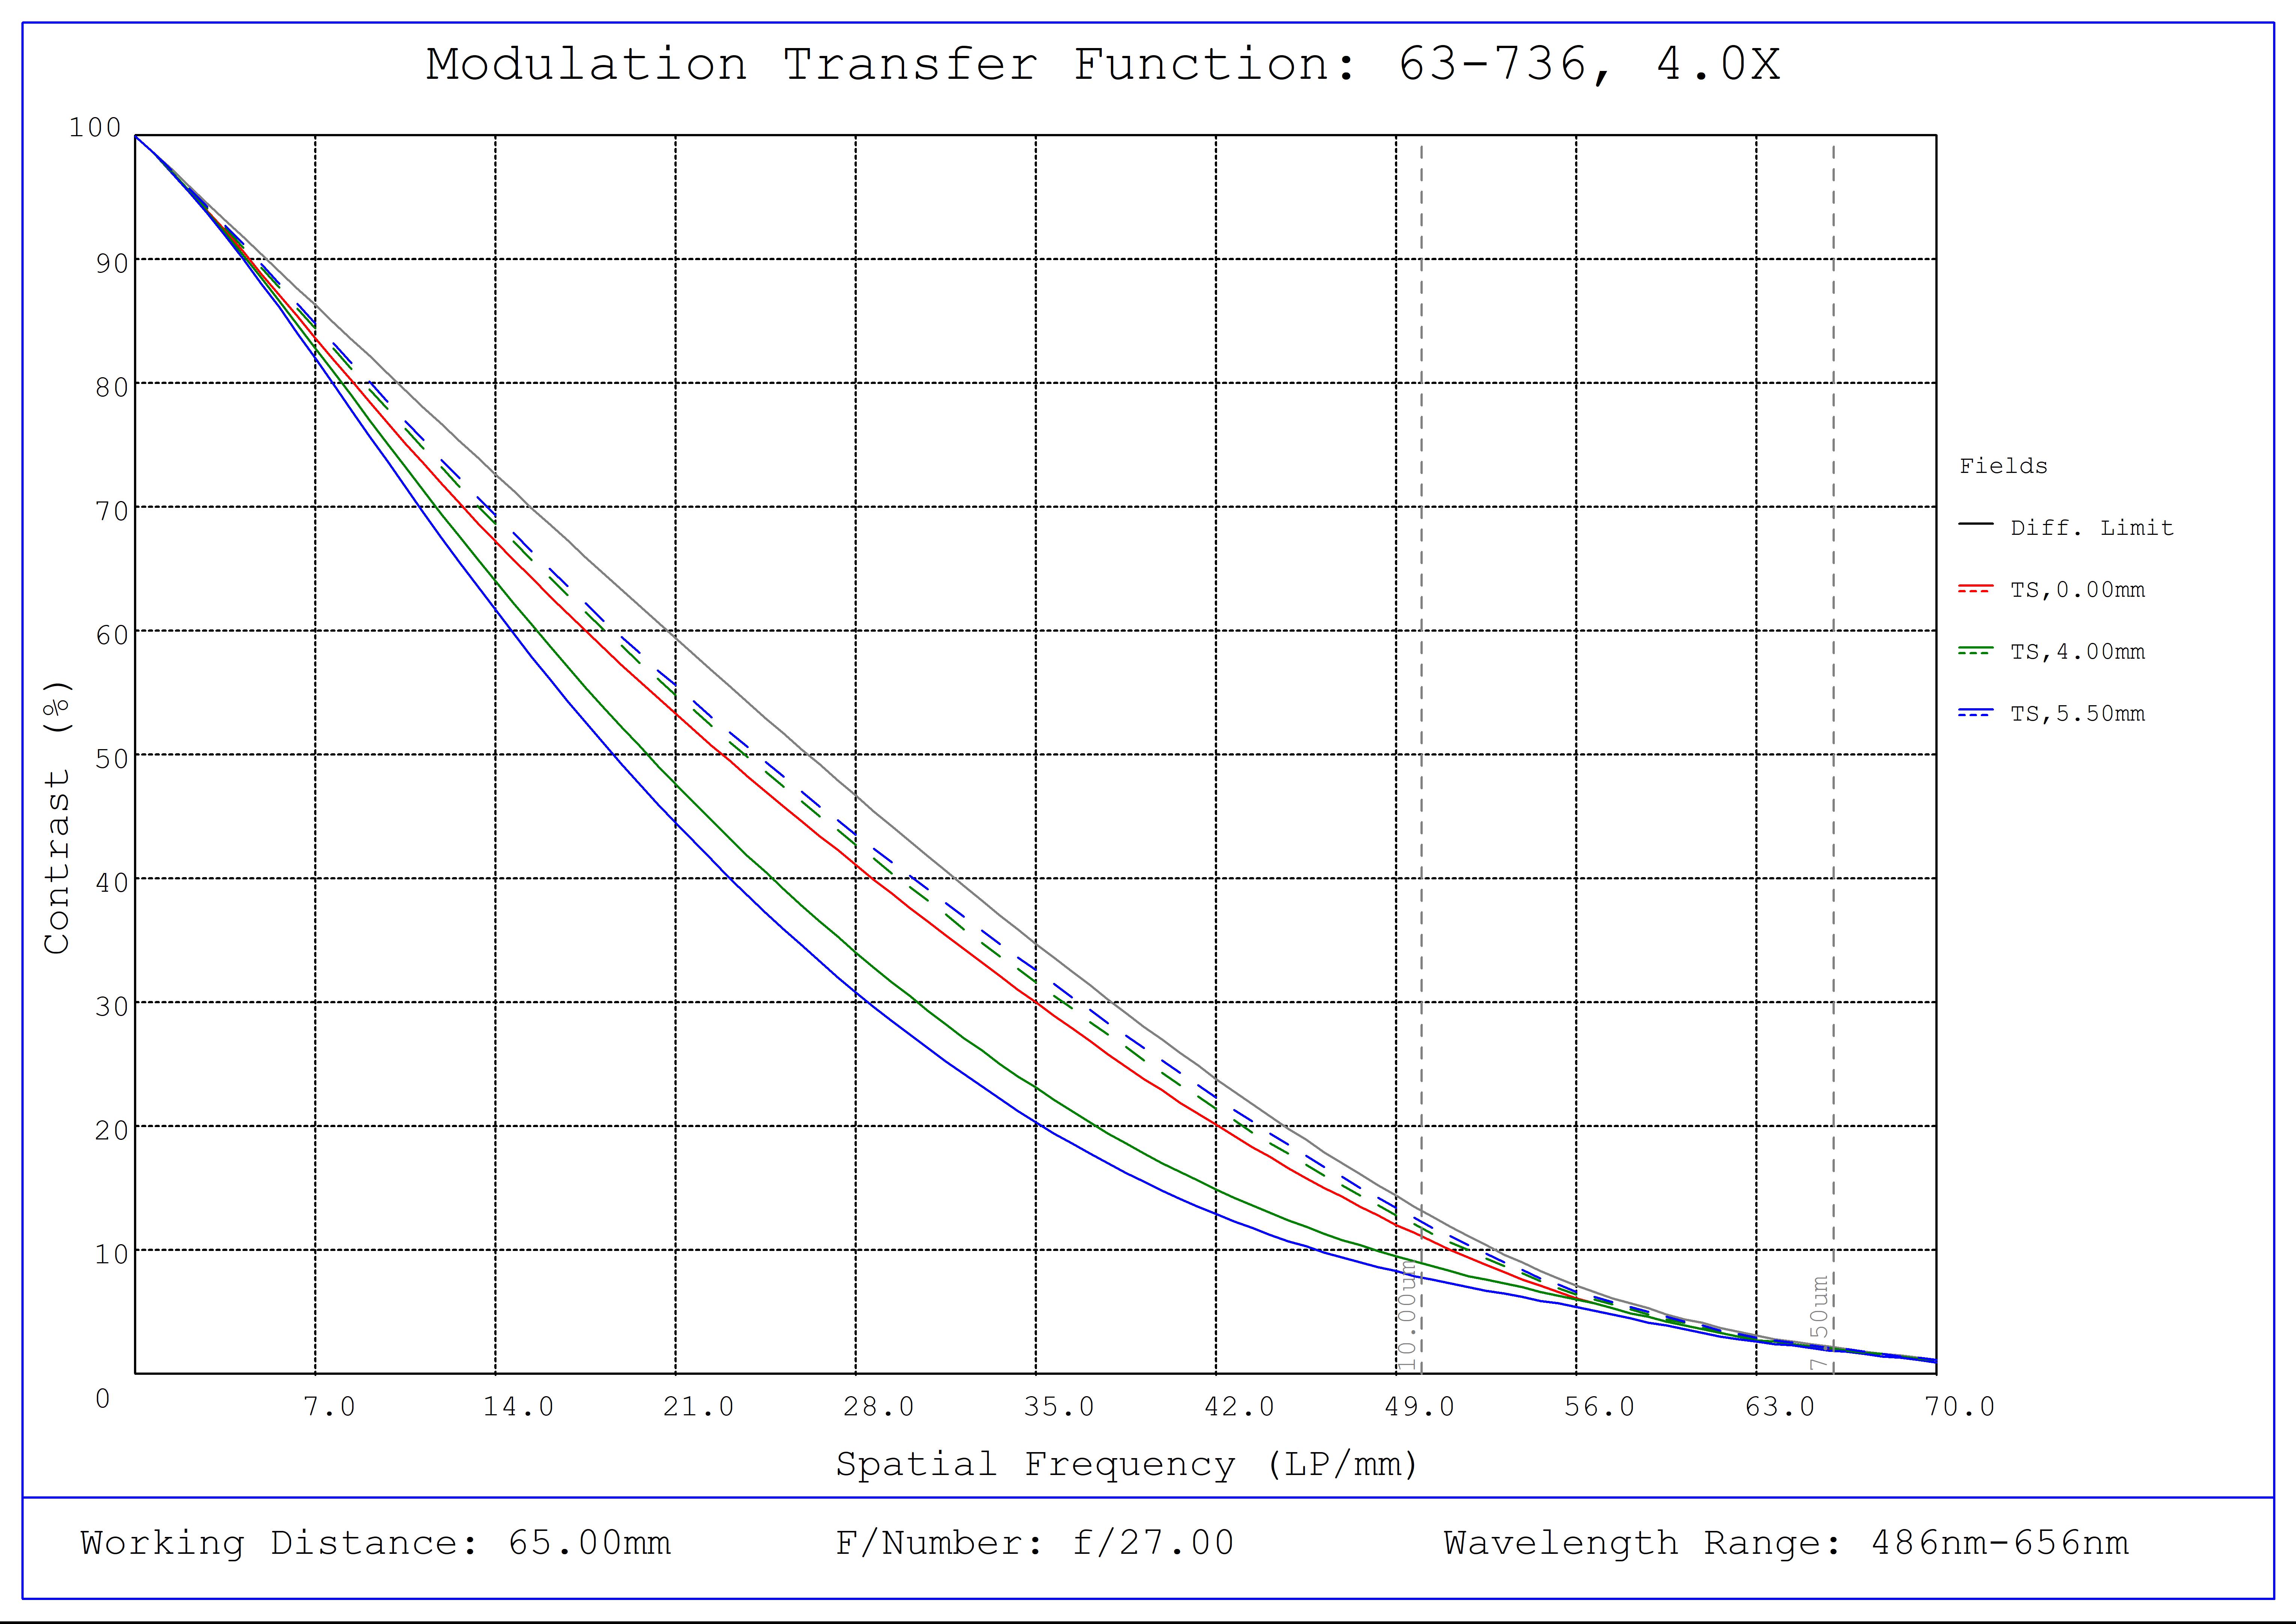 #63-736, 4X, 65mm WD CompactTL™ Telecentric Lens, Modulated Transfer Function (MTF) Plot, 65mm Working Distance, f27